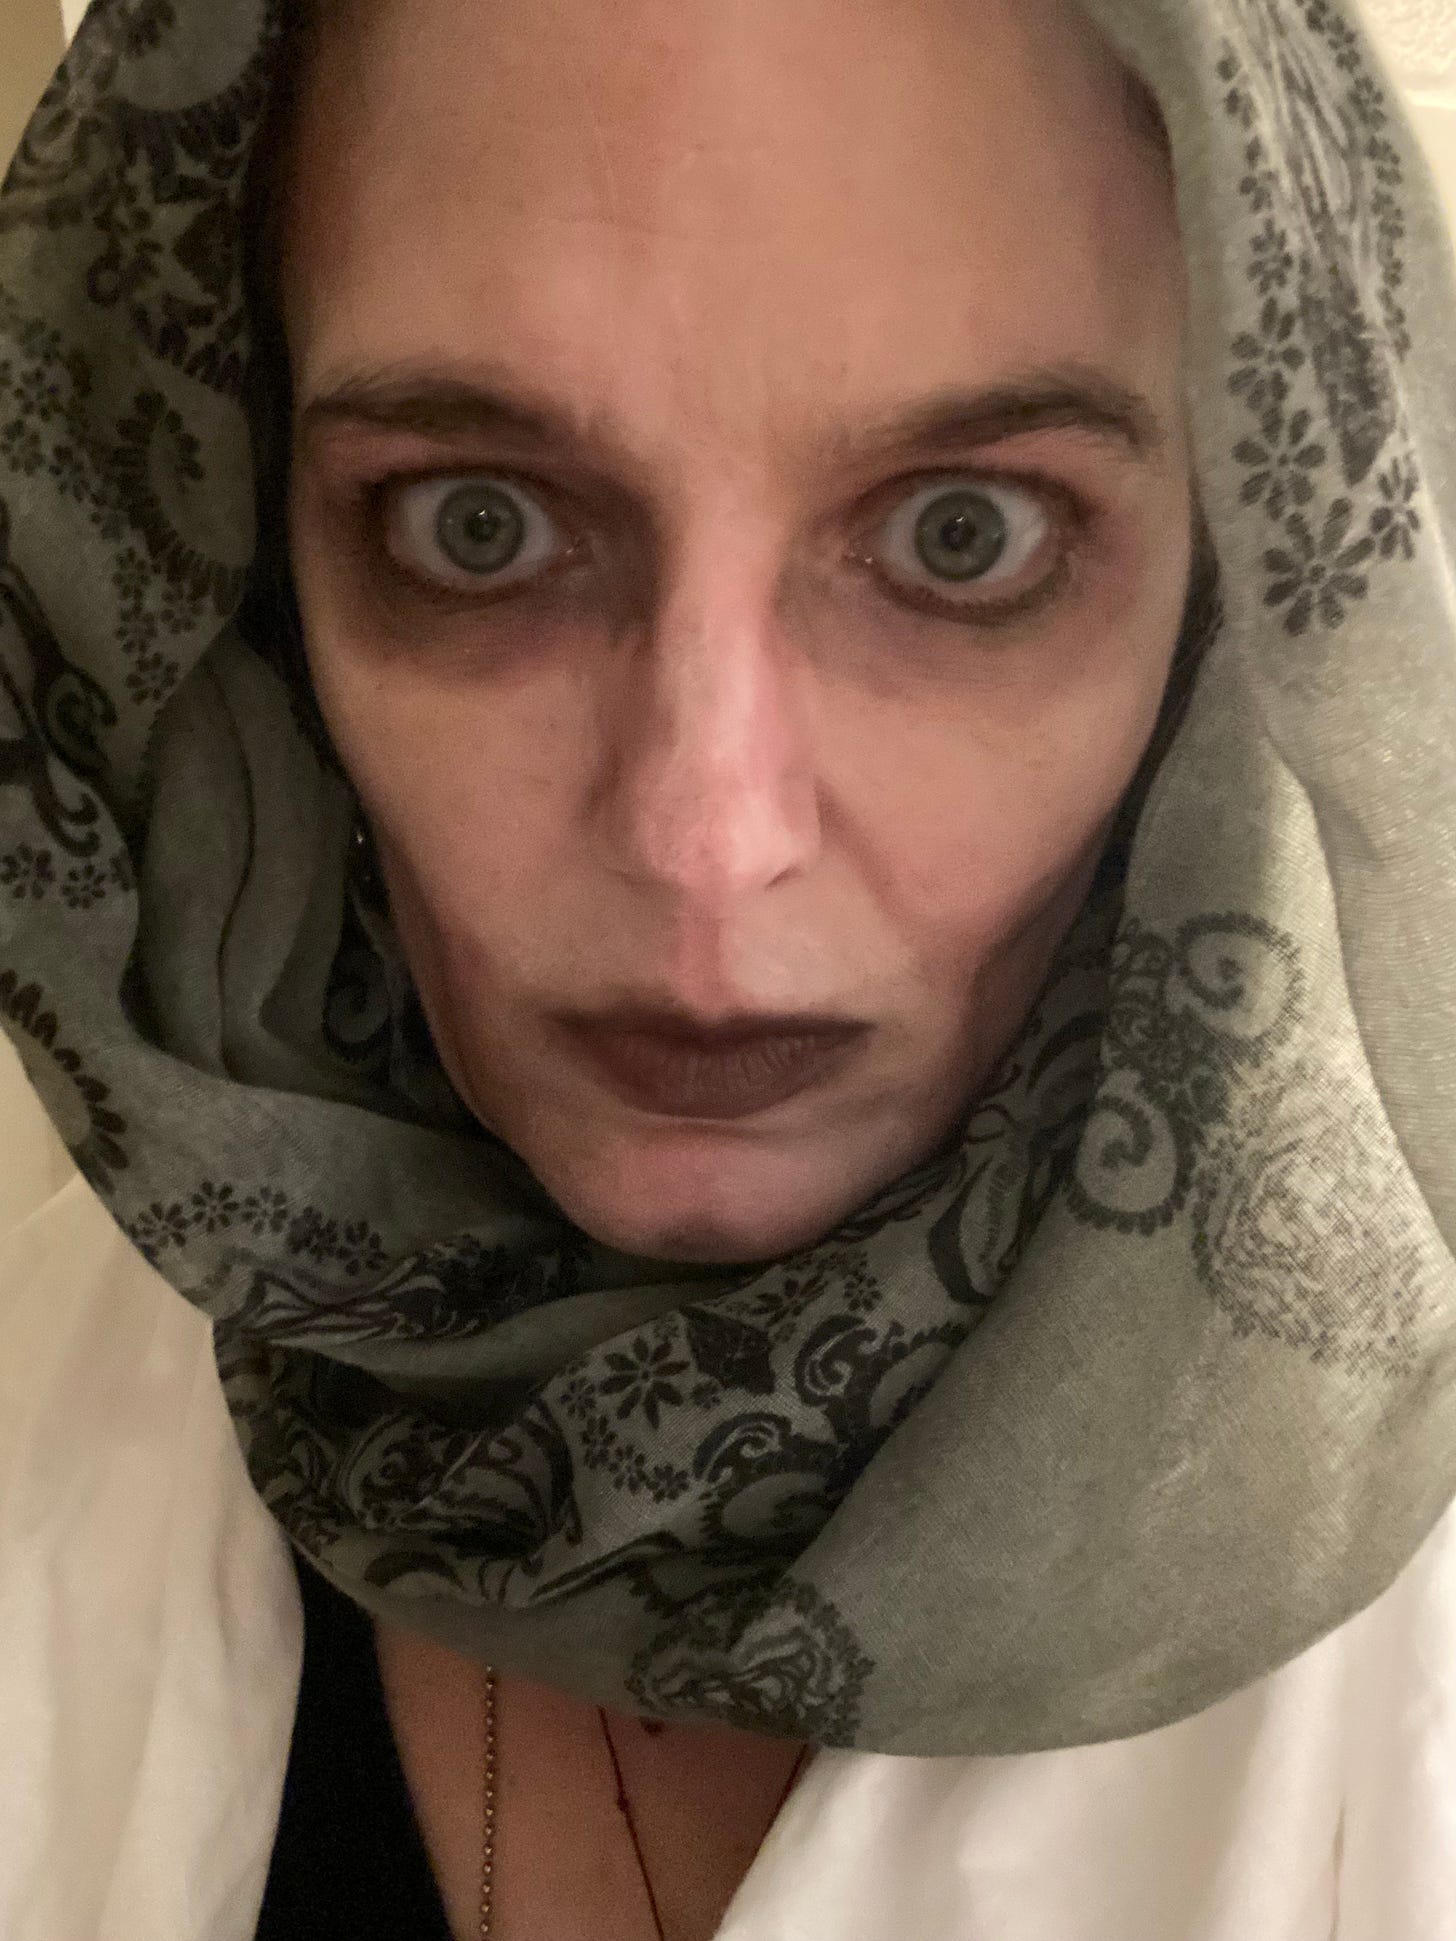 My face, painted with white, purple and black makeup so that I look sort of dead and spooky. My eyes are wide and I have a gray patterned scarf wrapped around my head like a hood. Boo.